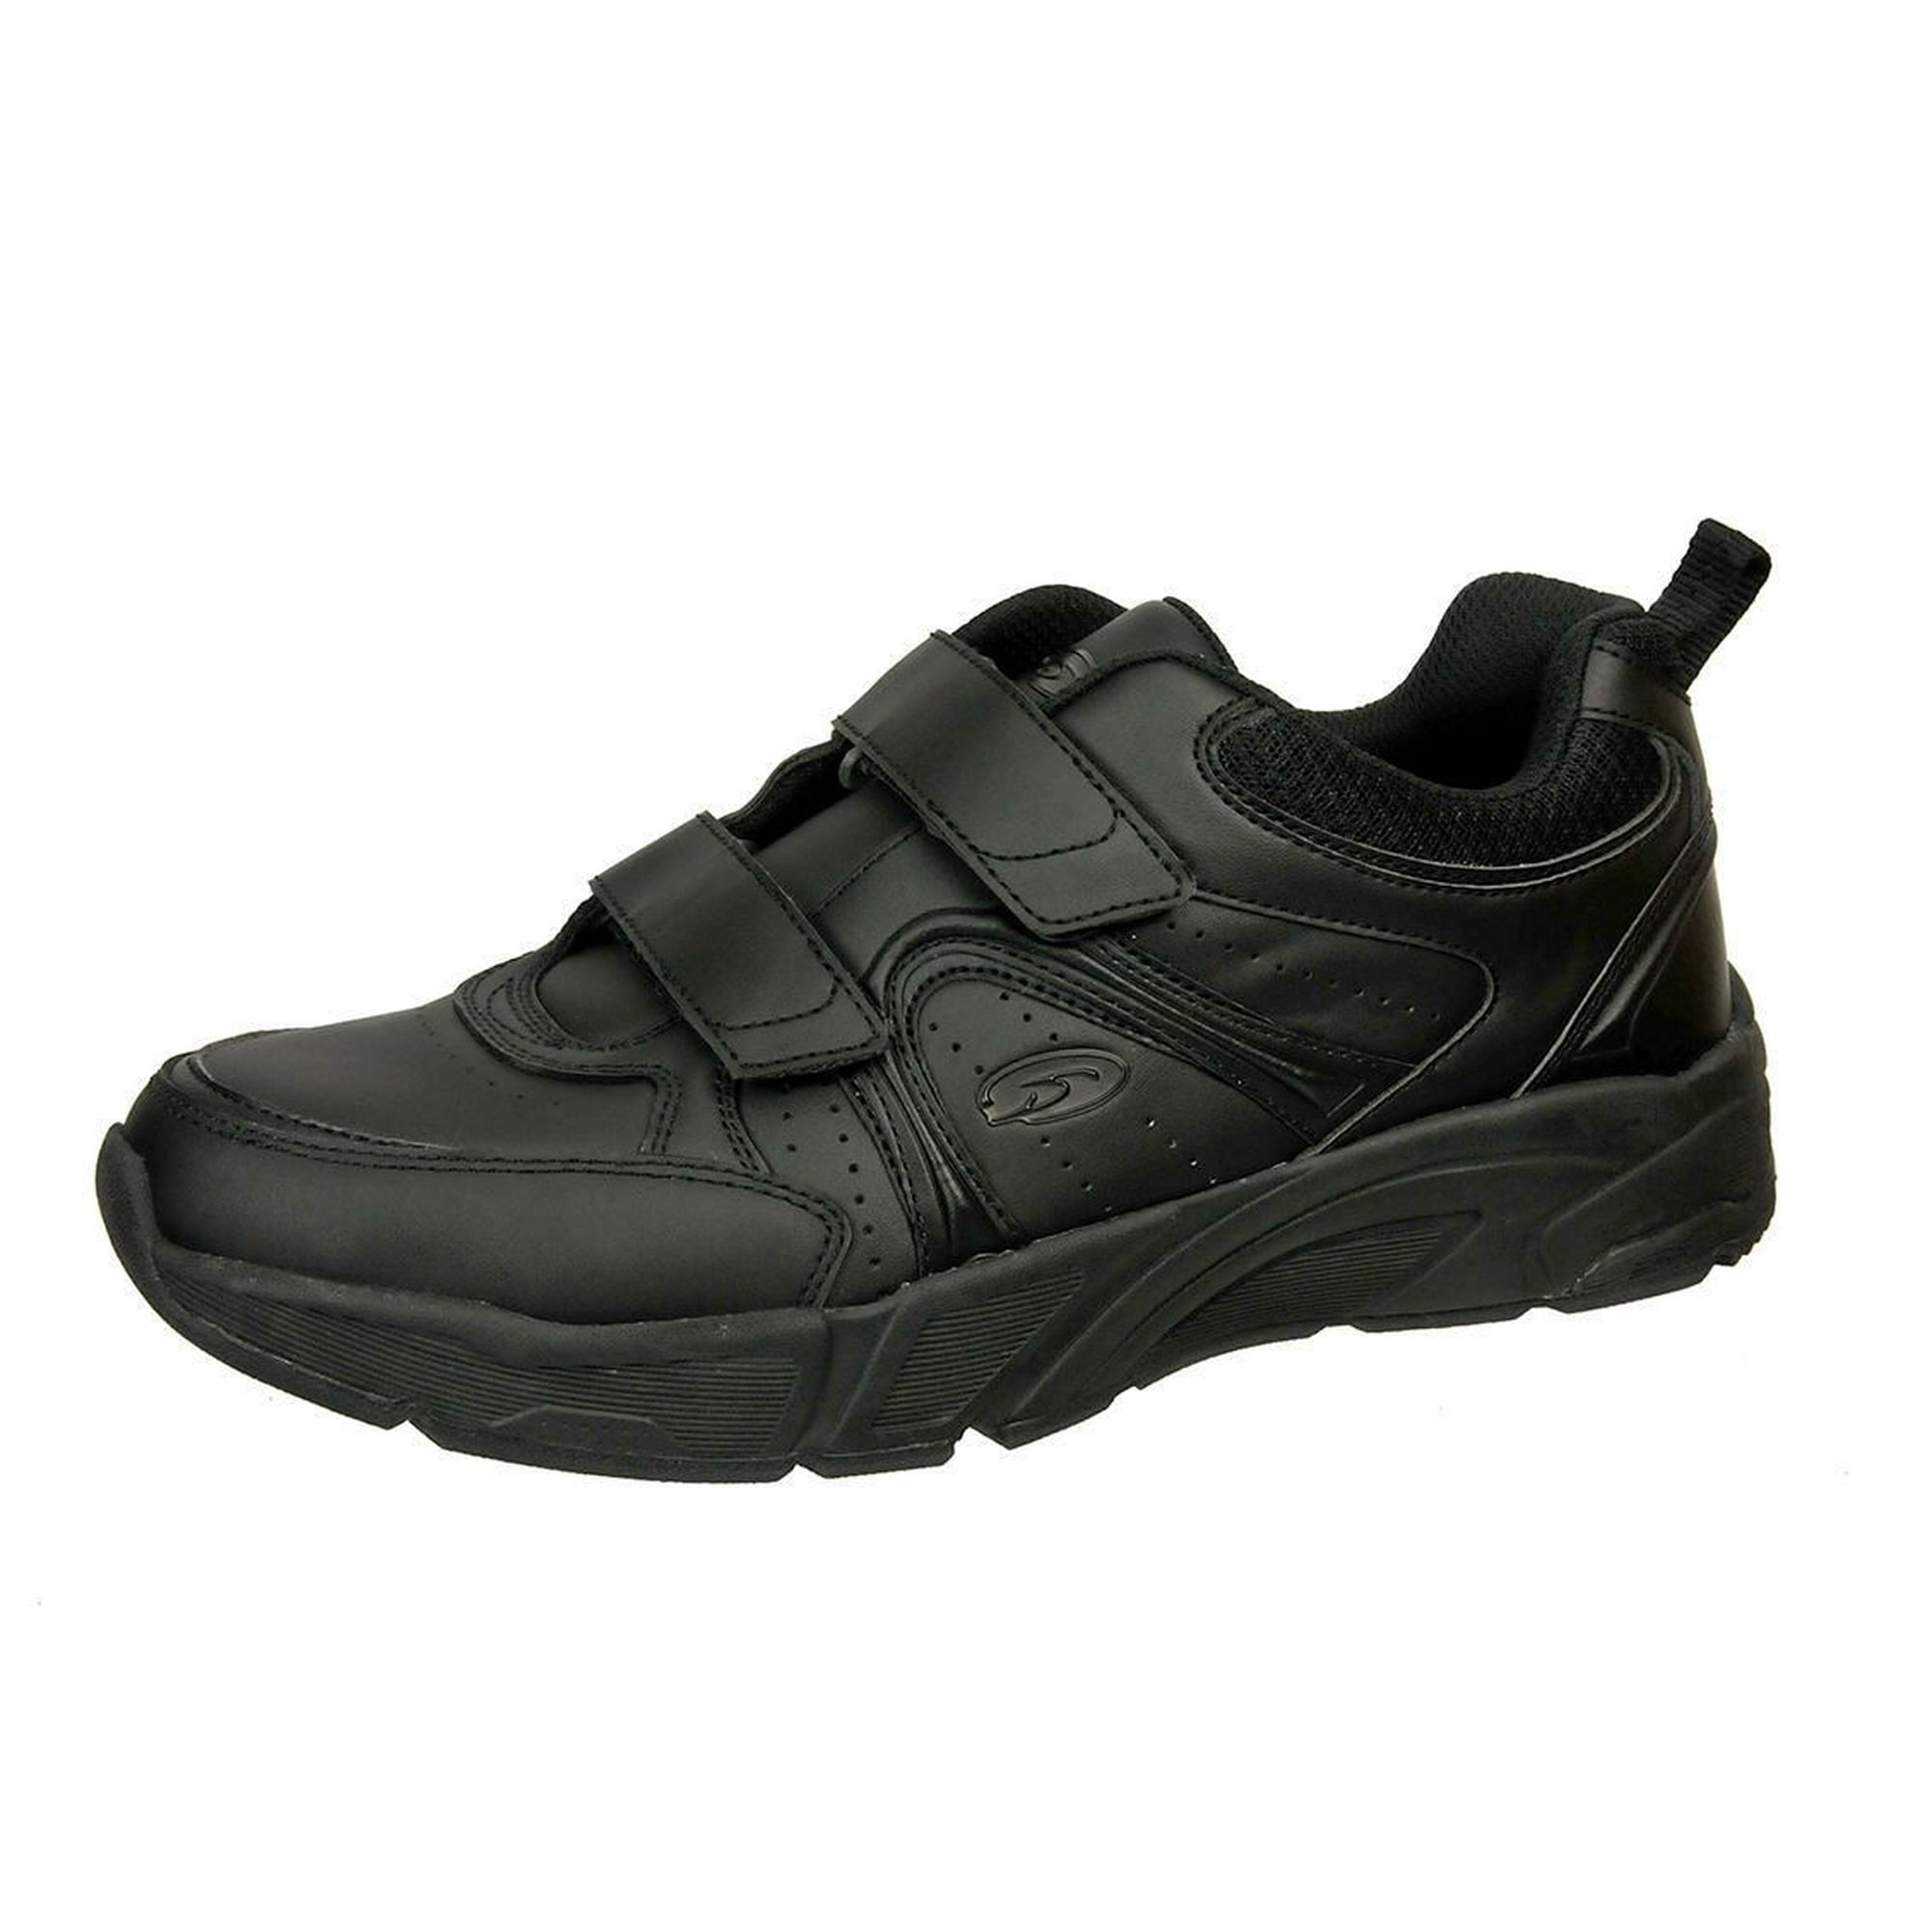 Shop Dash Kids Hook and Loop Closure Sports Shoes with Cushioning Online